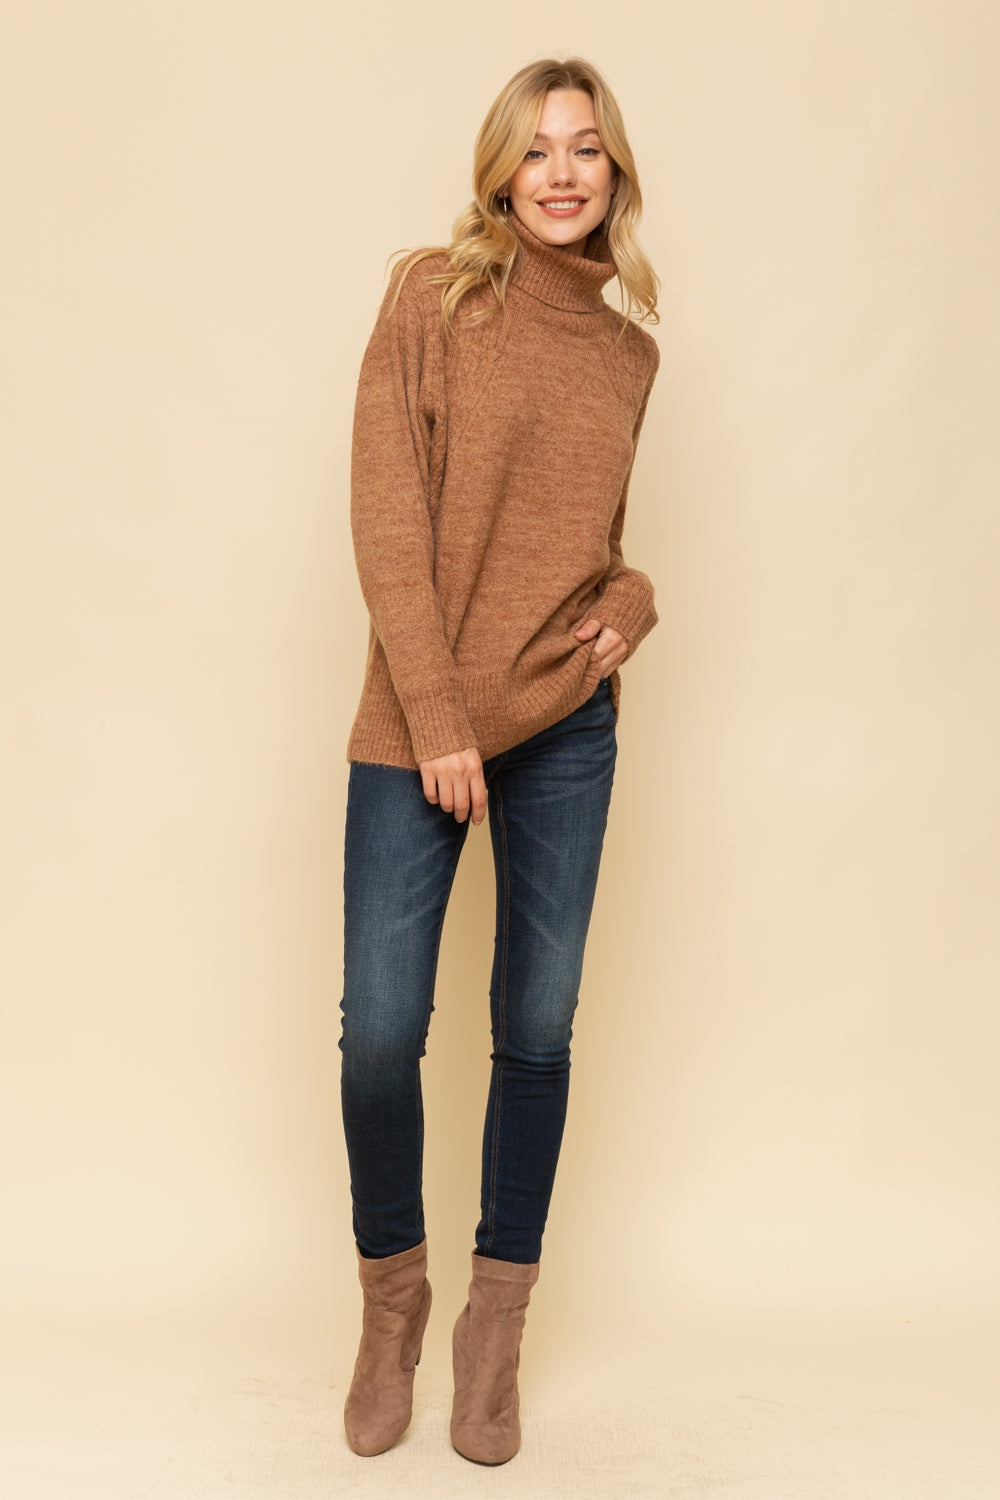 Just Rolling Along Sweater - Raw Sienna